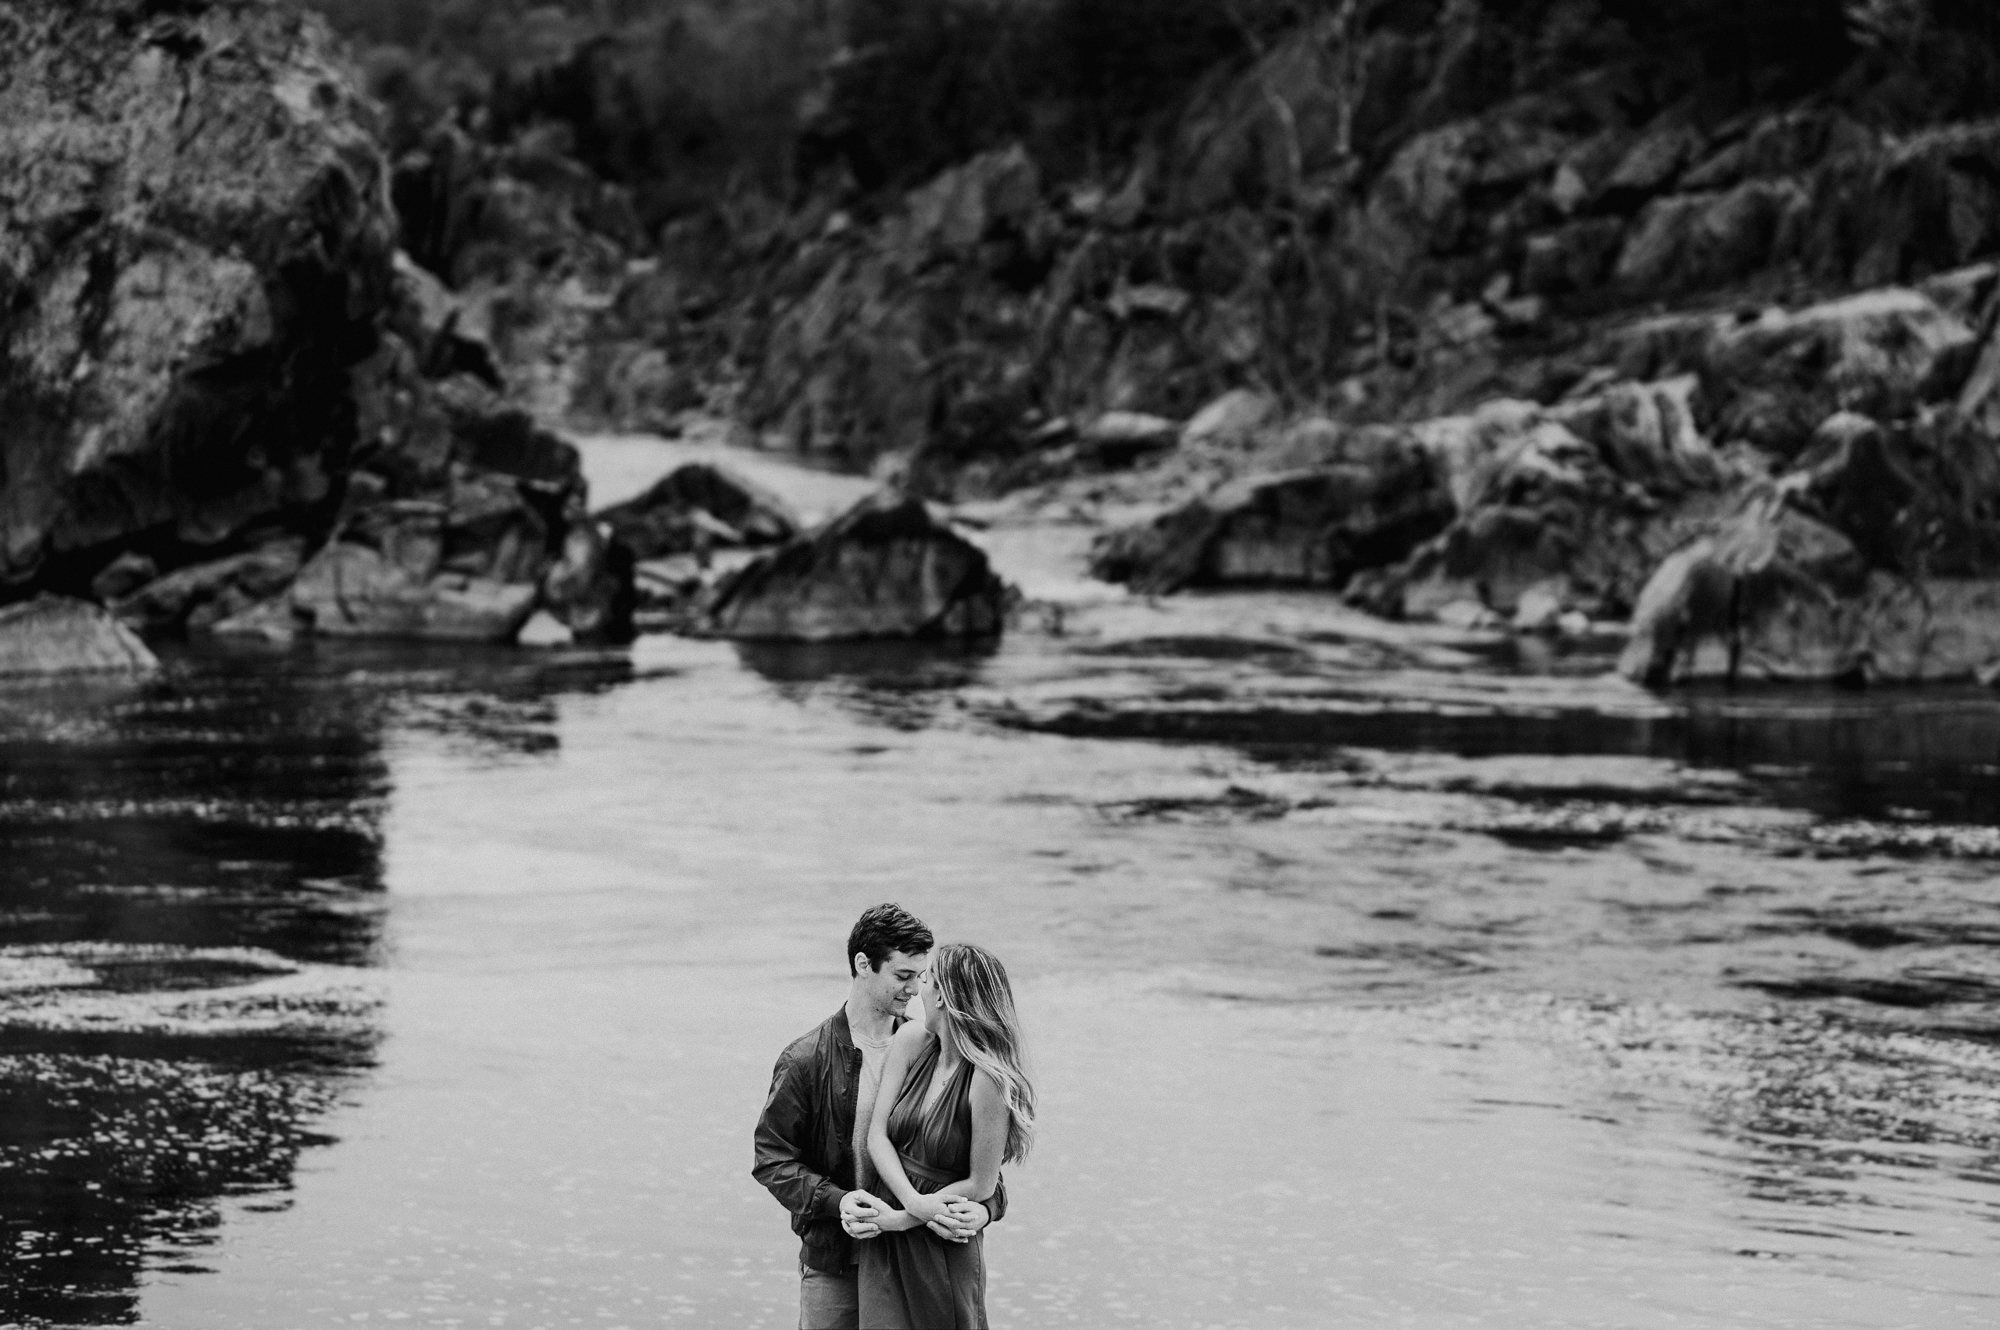  Kyle and Michela, who are celebrating their engagement with a photo session at the Billy Goat Trail. The theme of the session is the summer beach and the couple's journey towards a lifetime of love. It's a joyful and romantic occasion, and the Billy